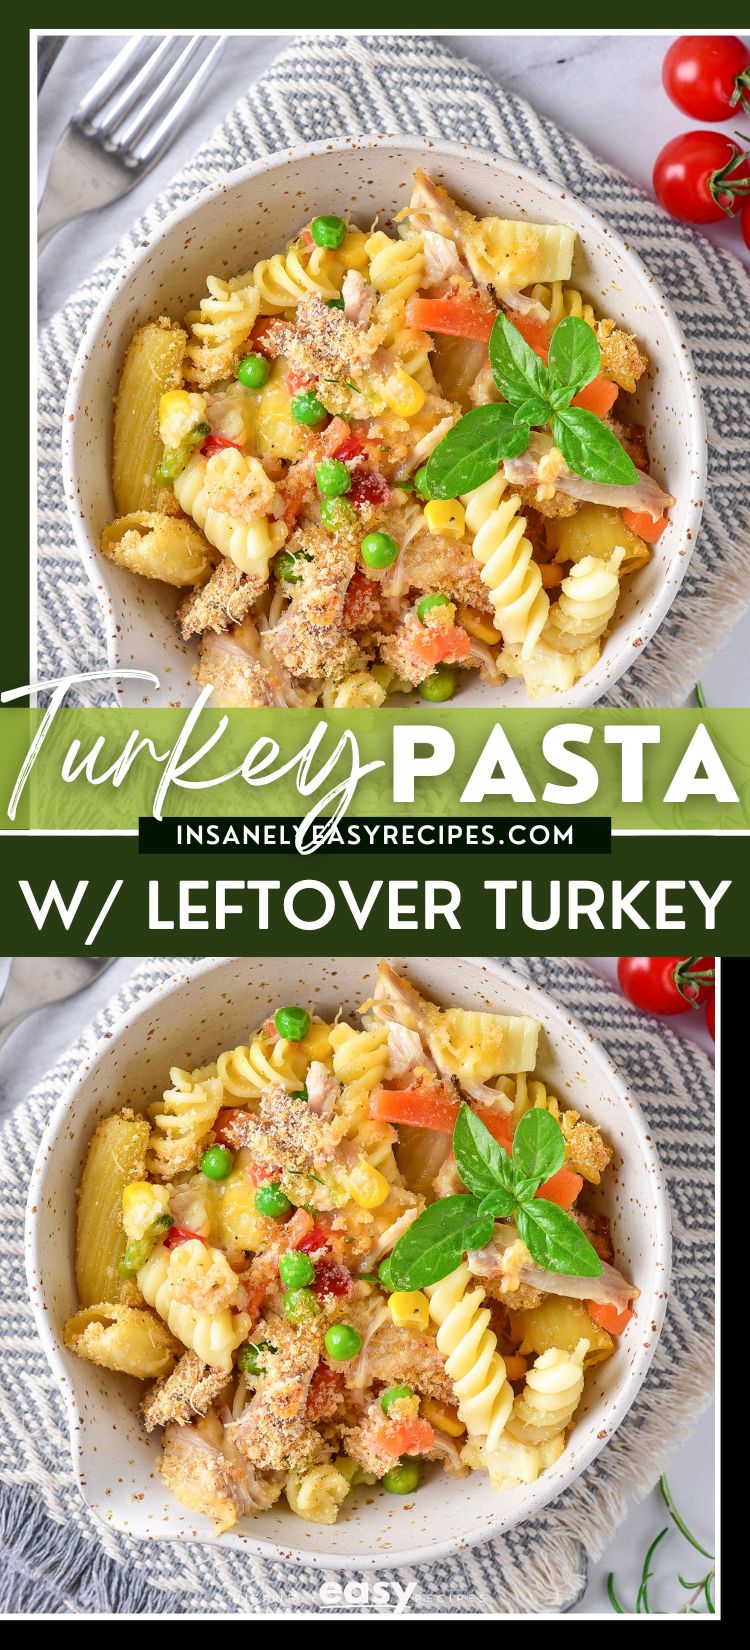 eftover turkey pasta bake in a white bowl and also in a white baking dish. You can see turkey chunks, tomatoes, basil and other veggies in the bake. Then to the back left aretwo forks and there are cherry tomatoes sprinkled around the dish. with textoverlay turkey pasta w/ leftover turkey